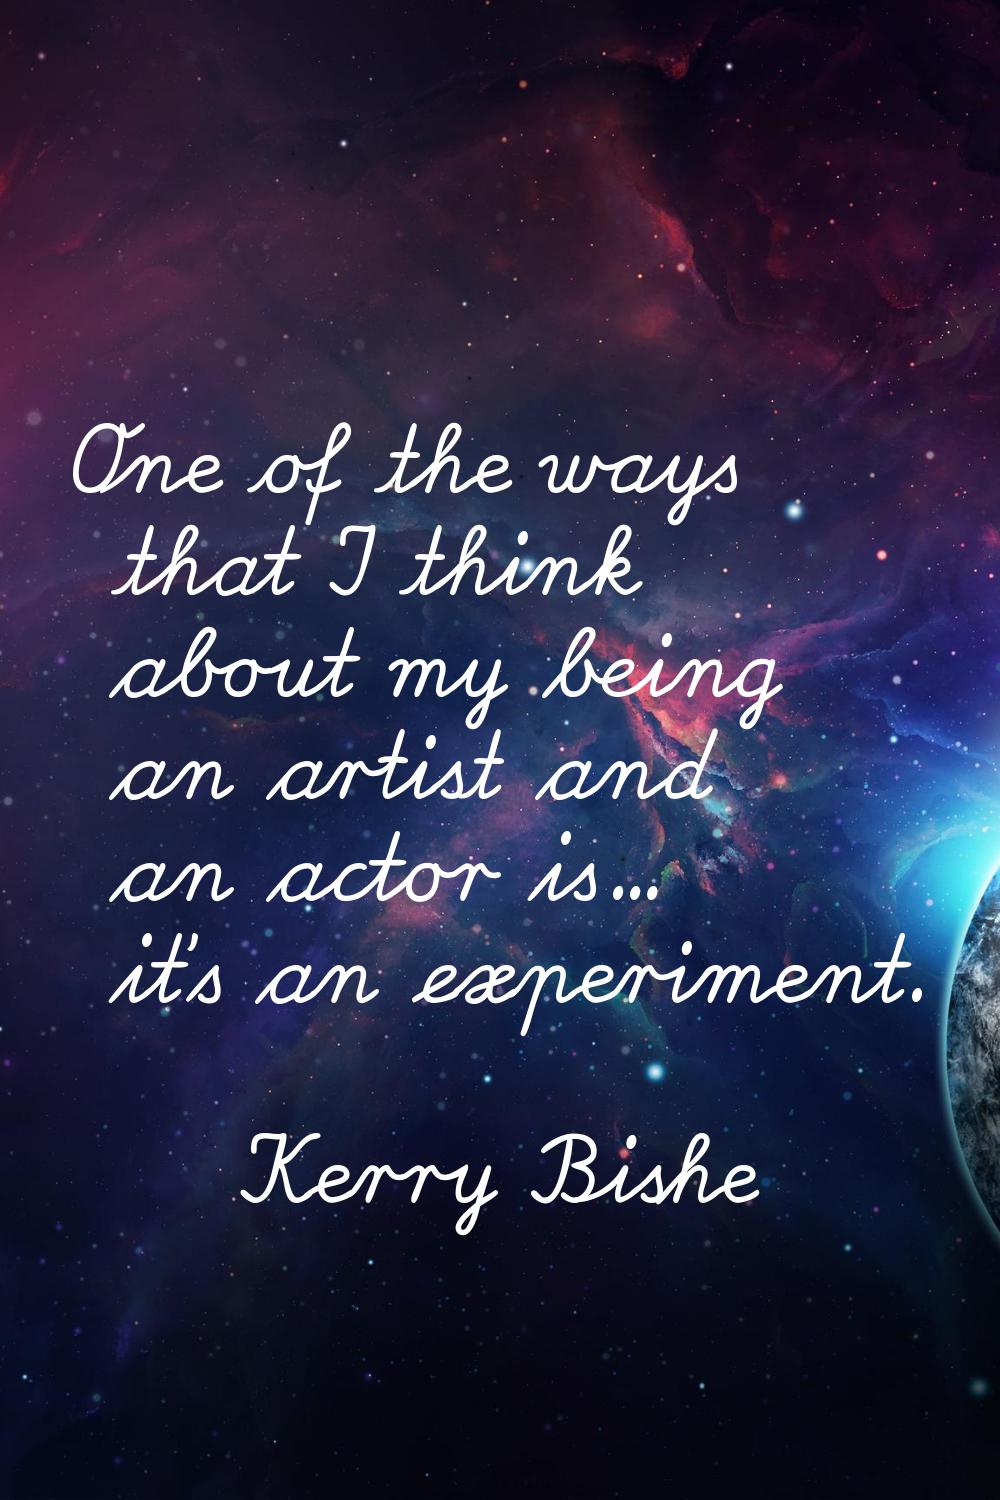 One of the ways that I think about my being an artist and an actor is... it's an experiment.